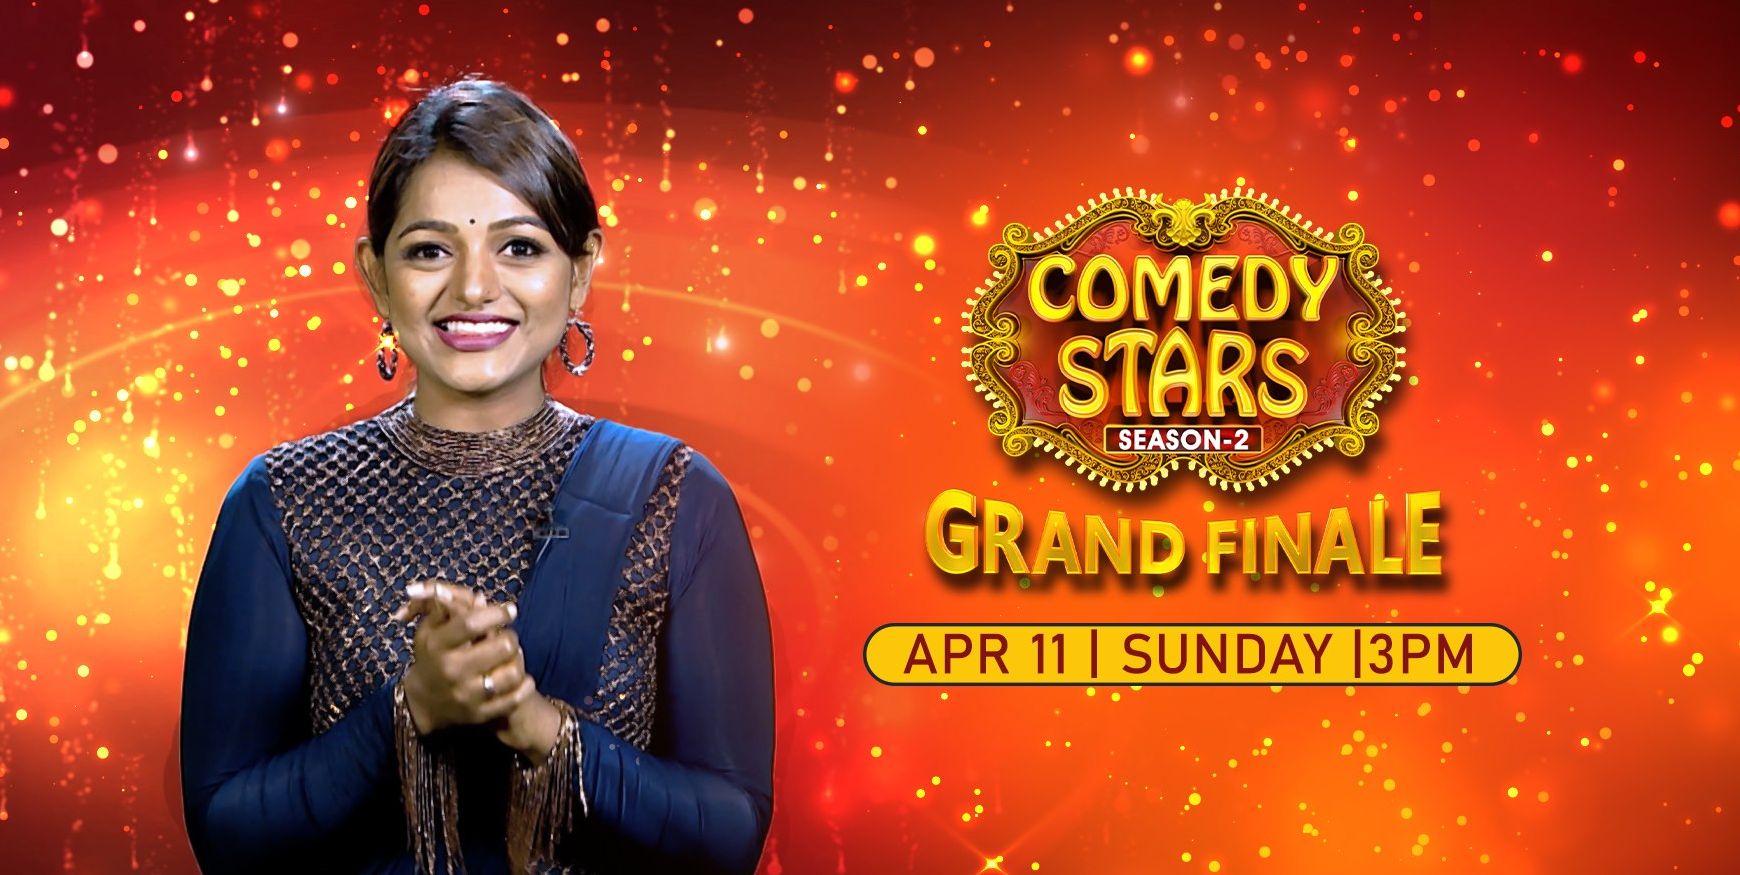 Comedy Stars Season 2 Grand Finale Telecast On Asianet - 11th April At ...